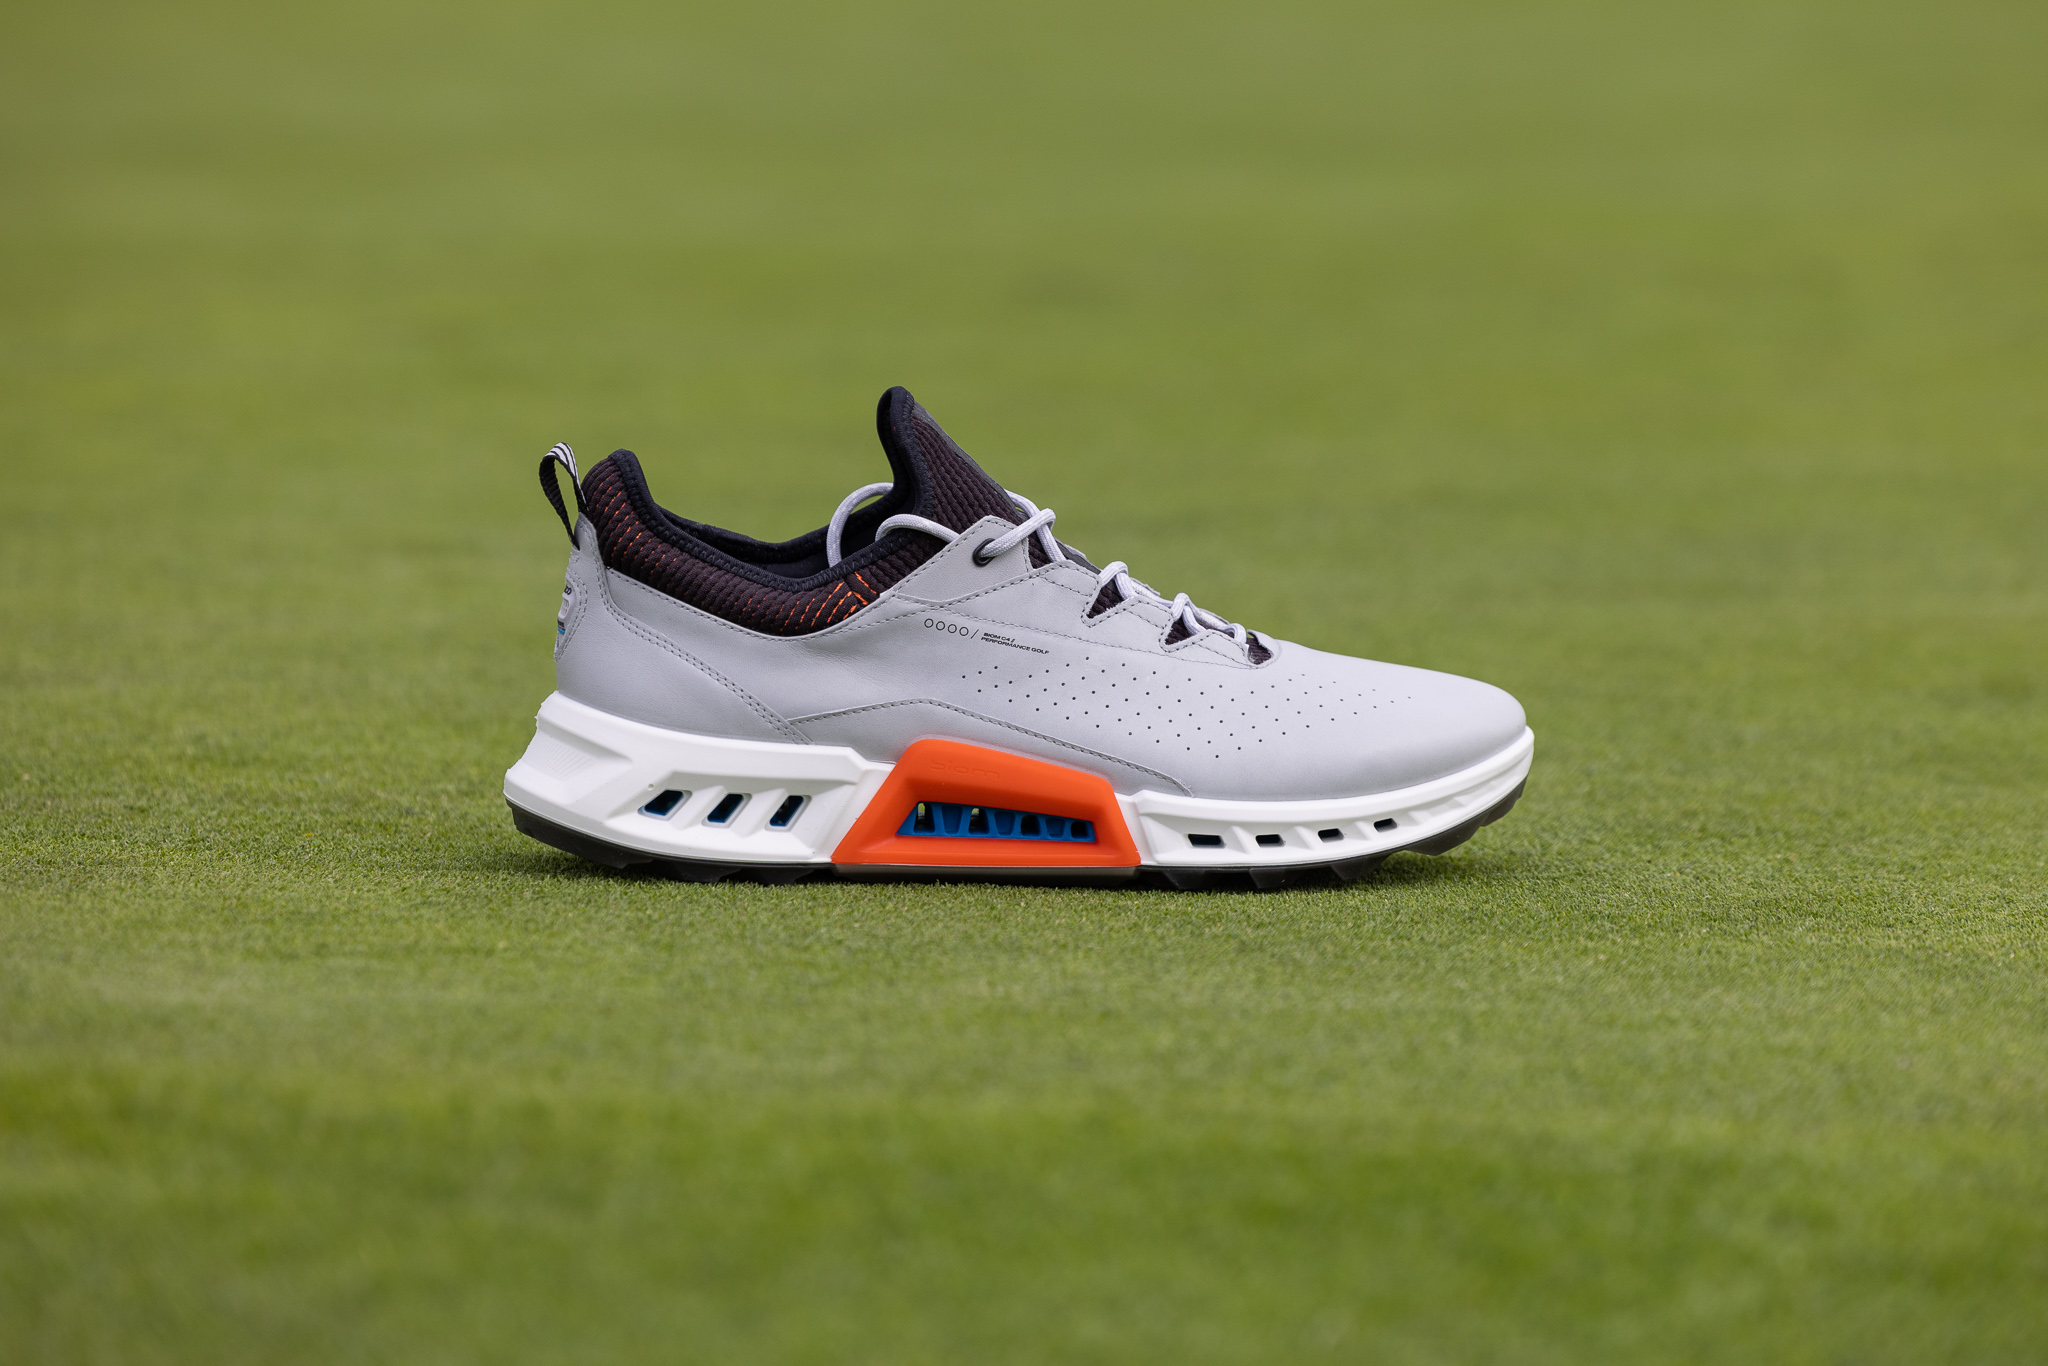 Meting beroerte cruise Ecco Biom C4 Review: The Best Golf Shoe I've Ever Owned -